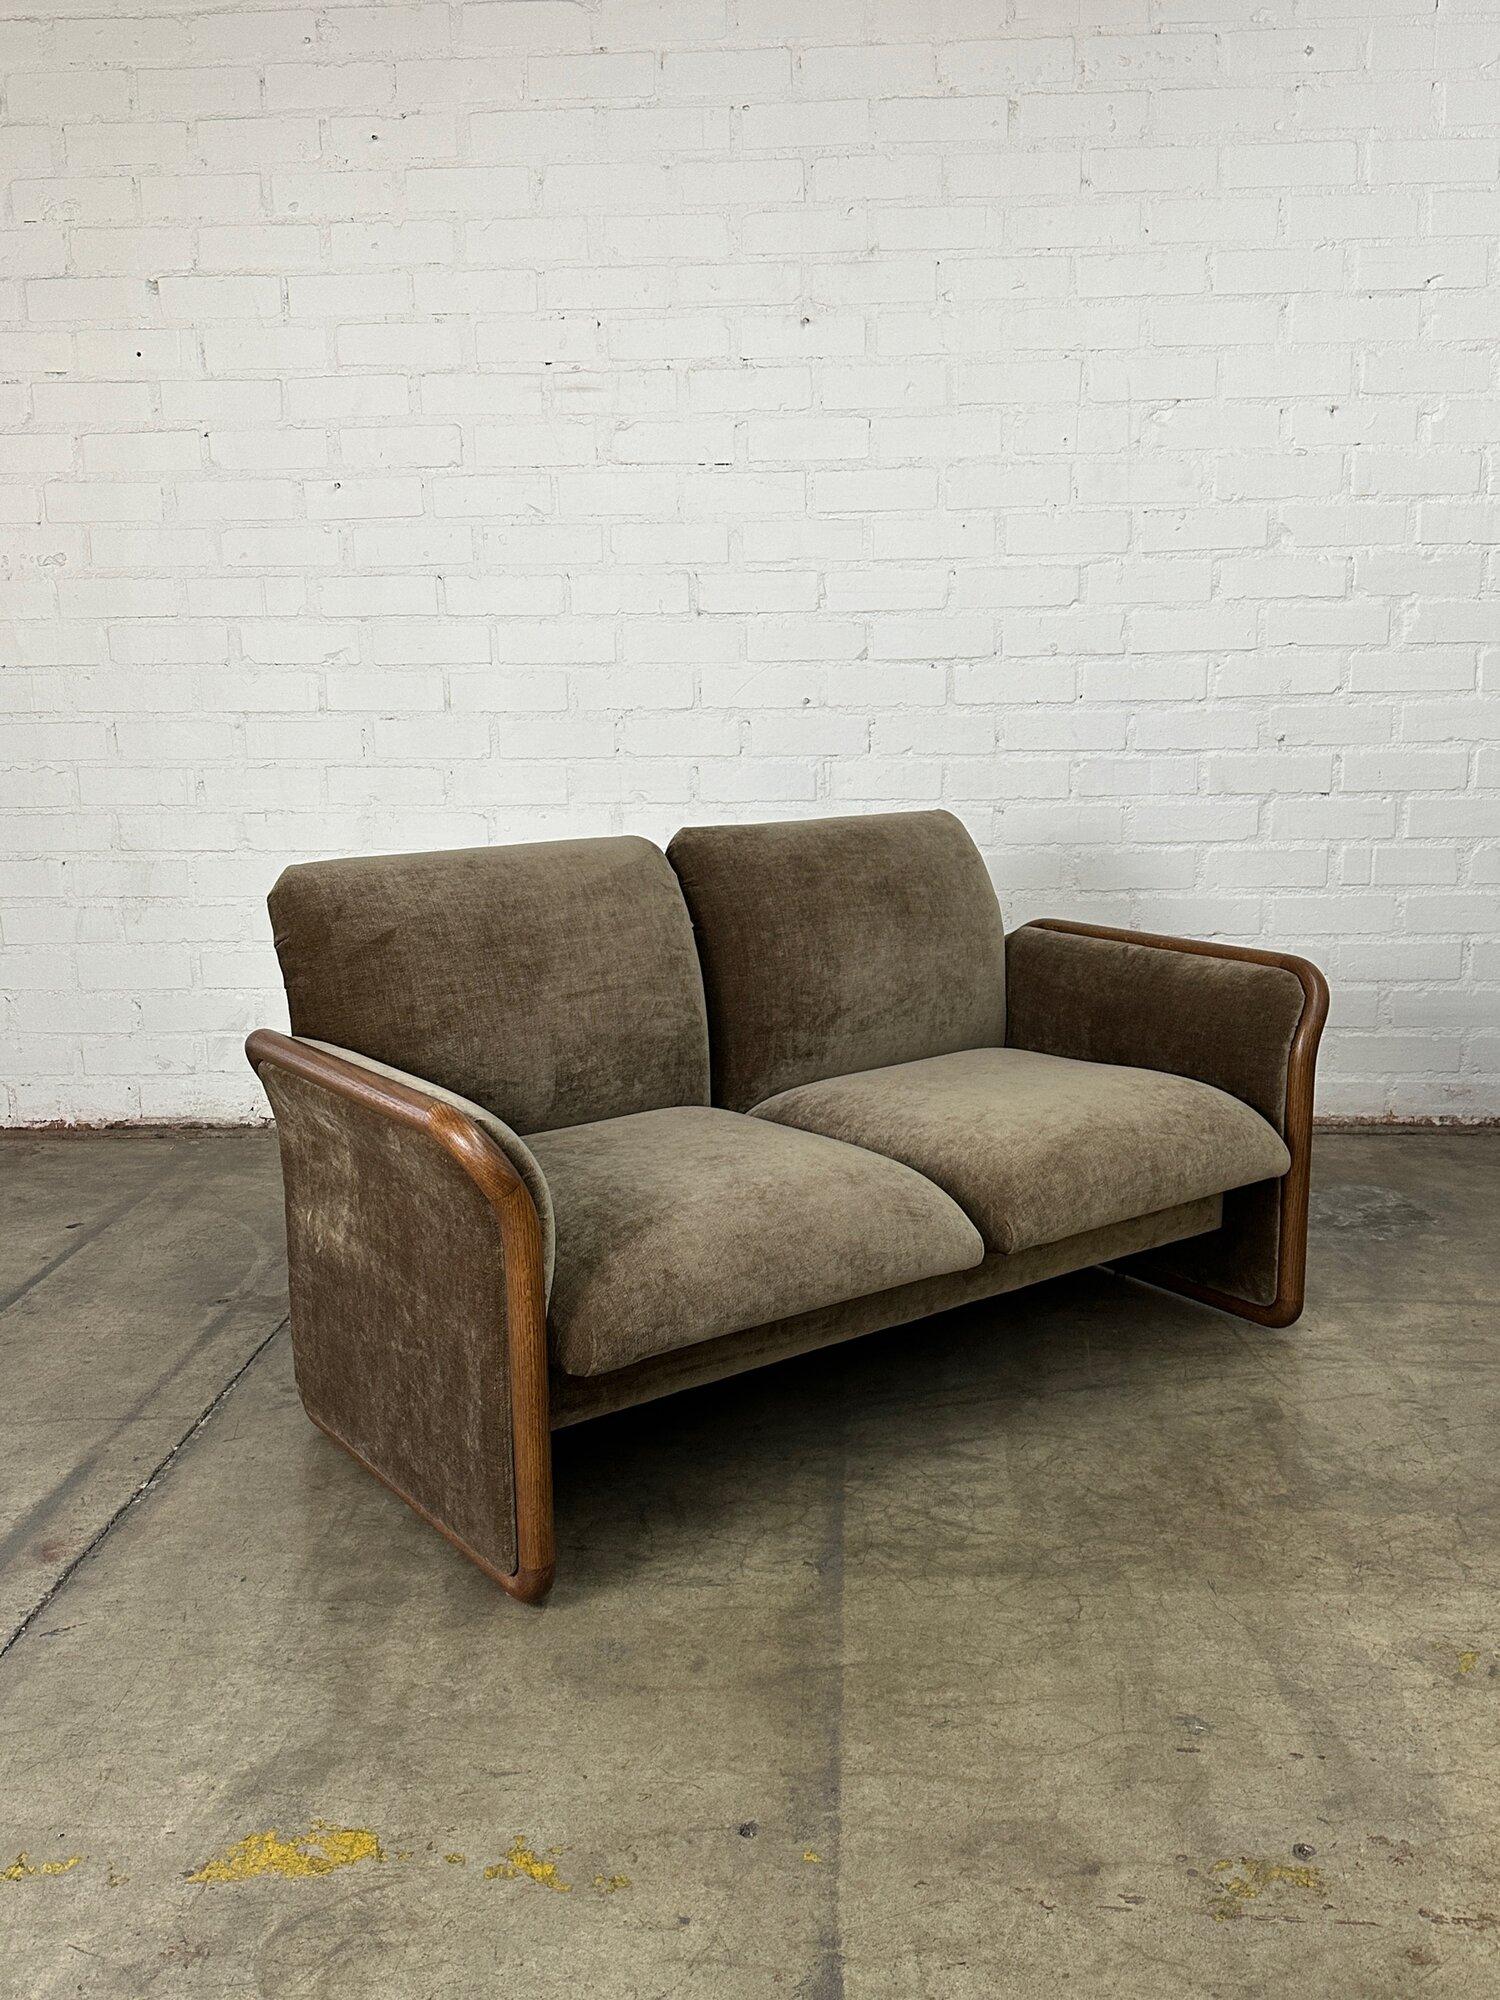 Late 20th Century Post Modern Loveseat For Sale